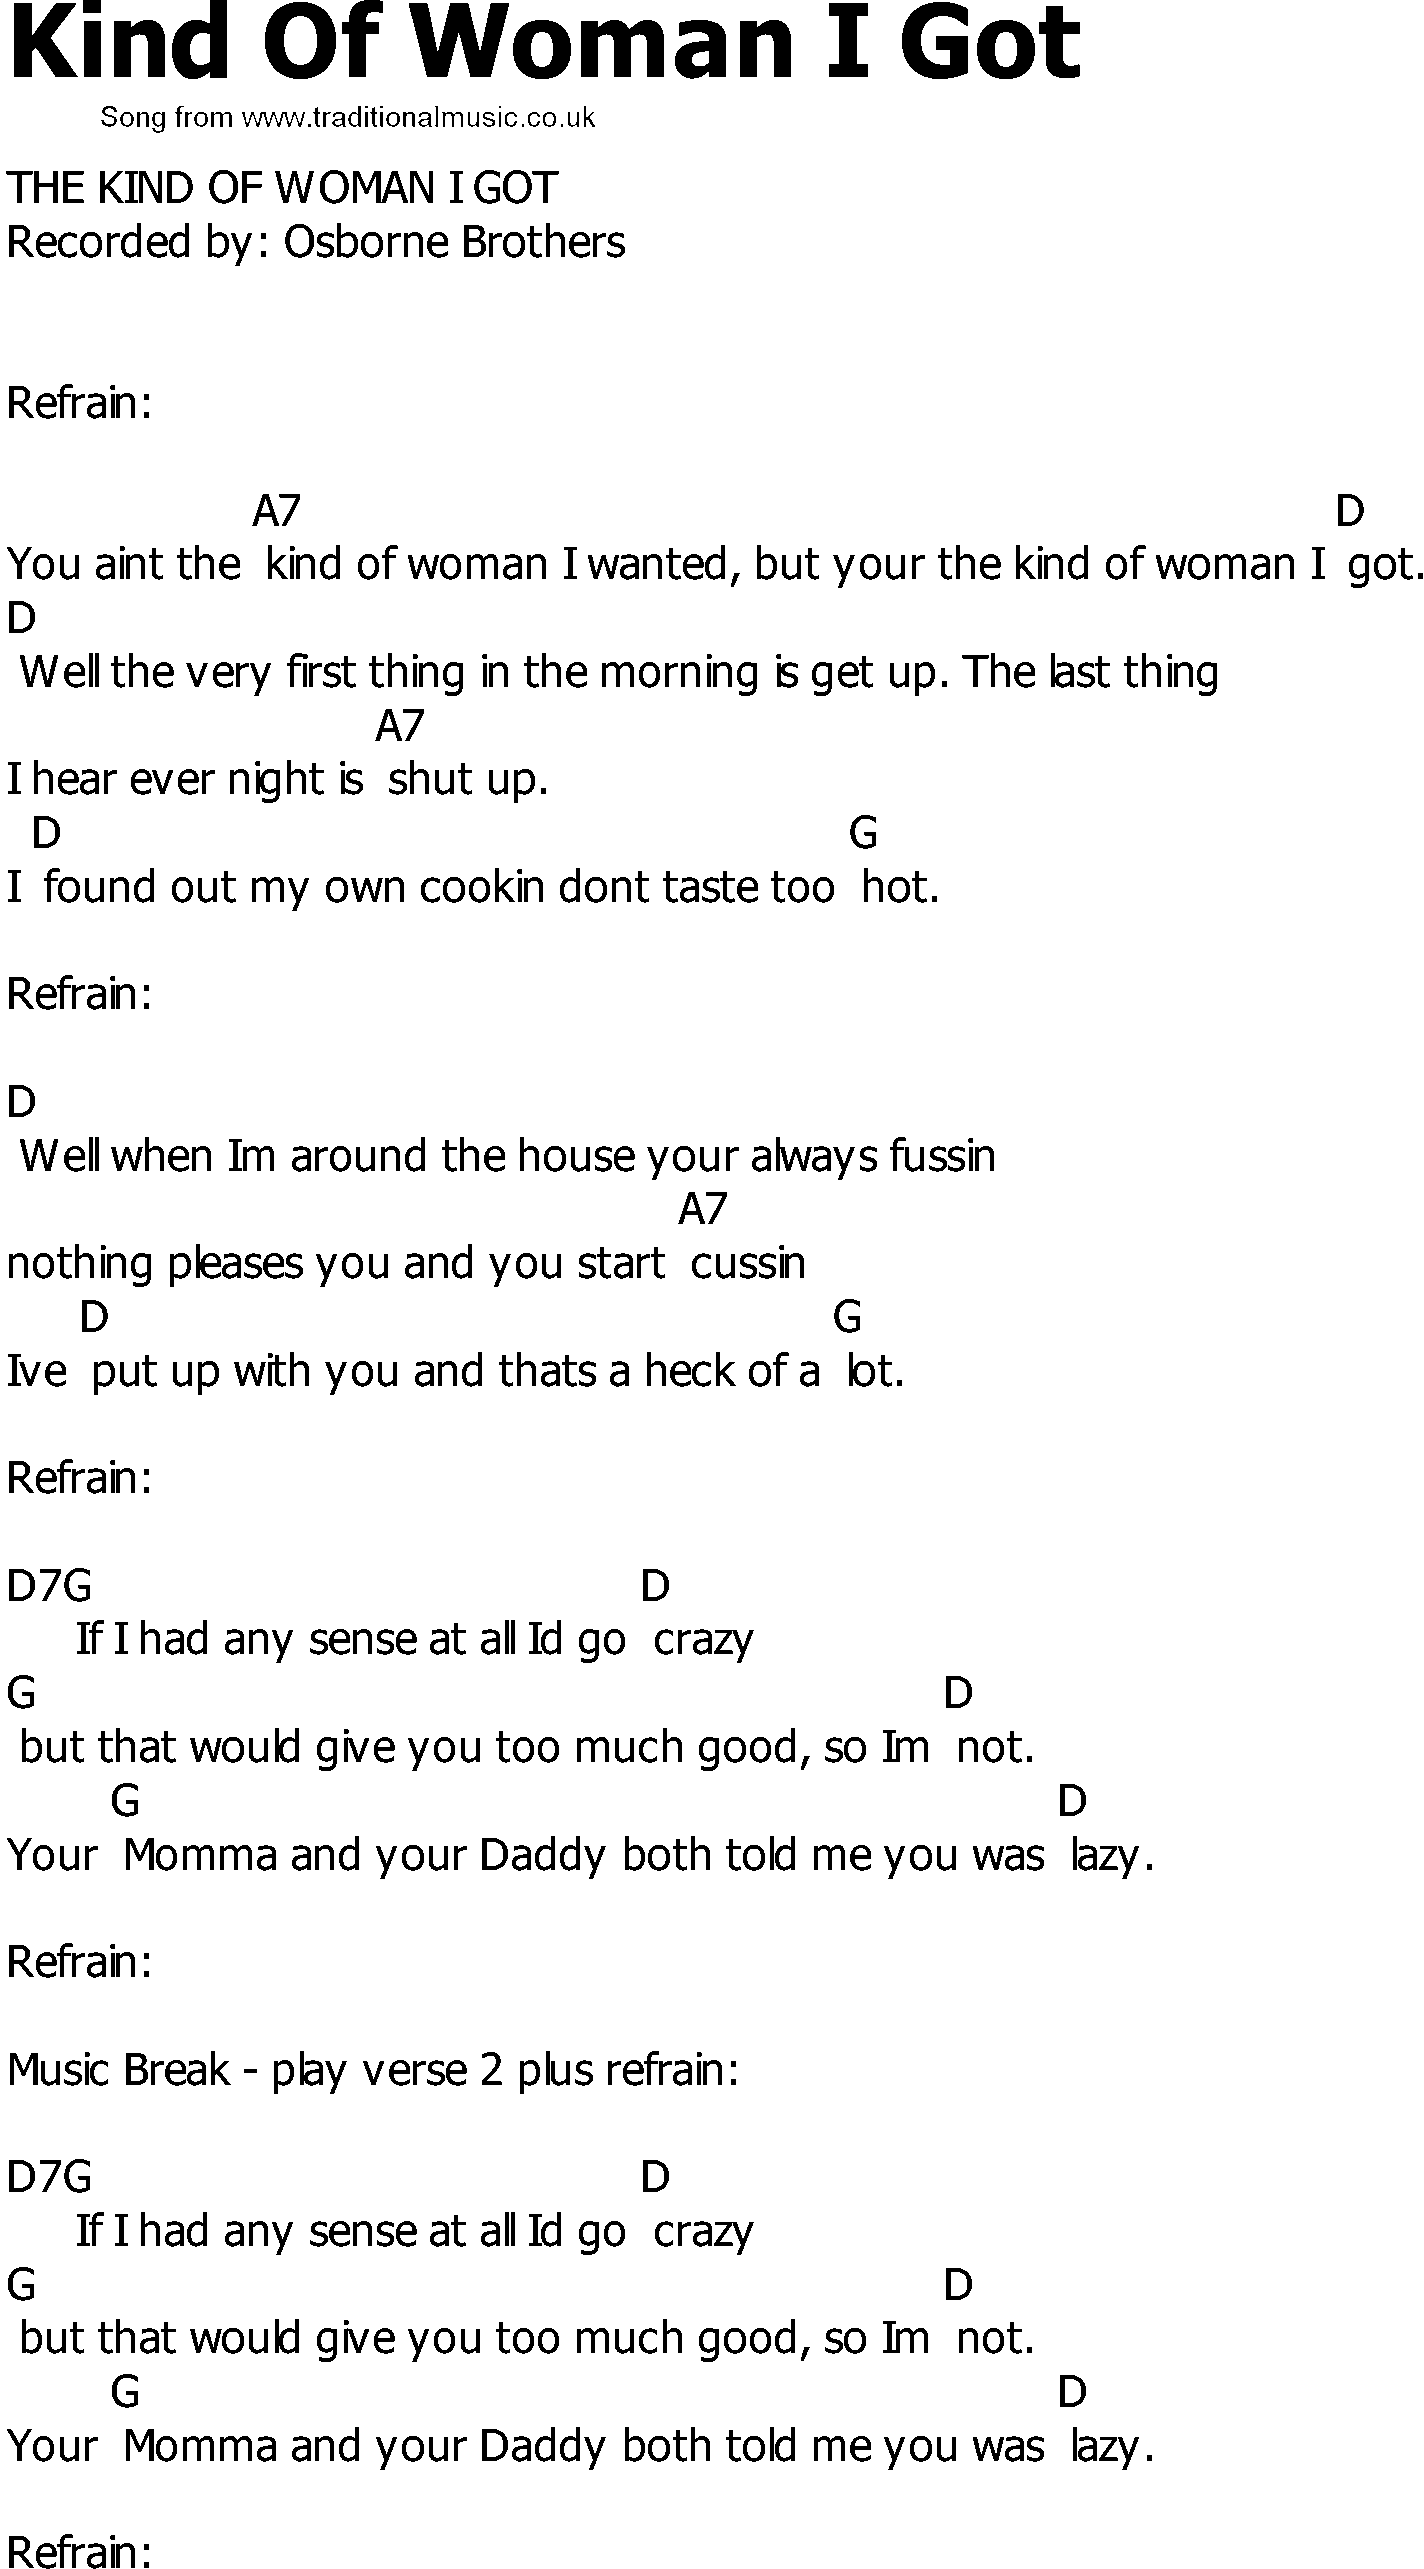 Old Country song lyrics with chords - Kind Of Woman I Got